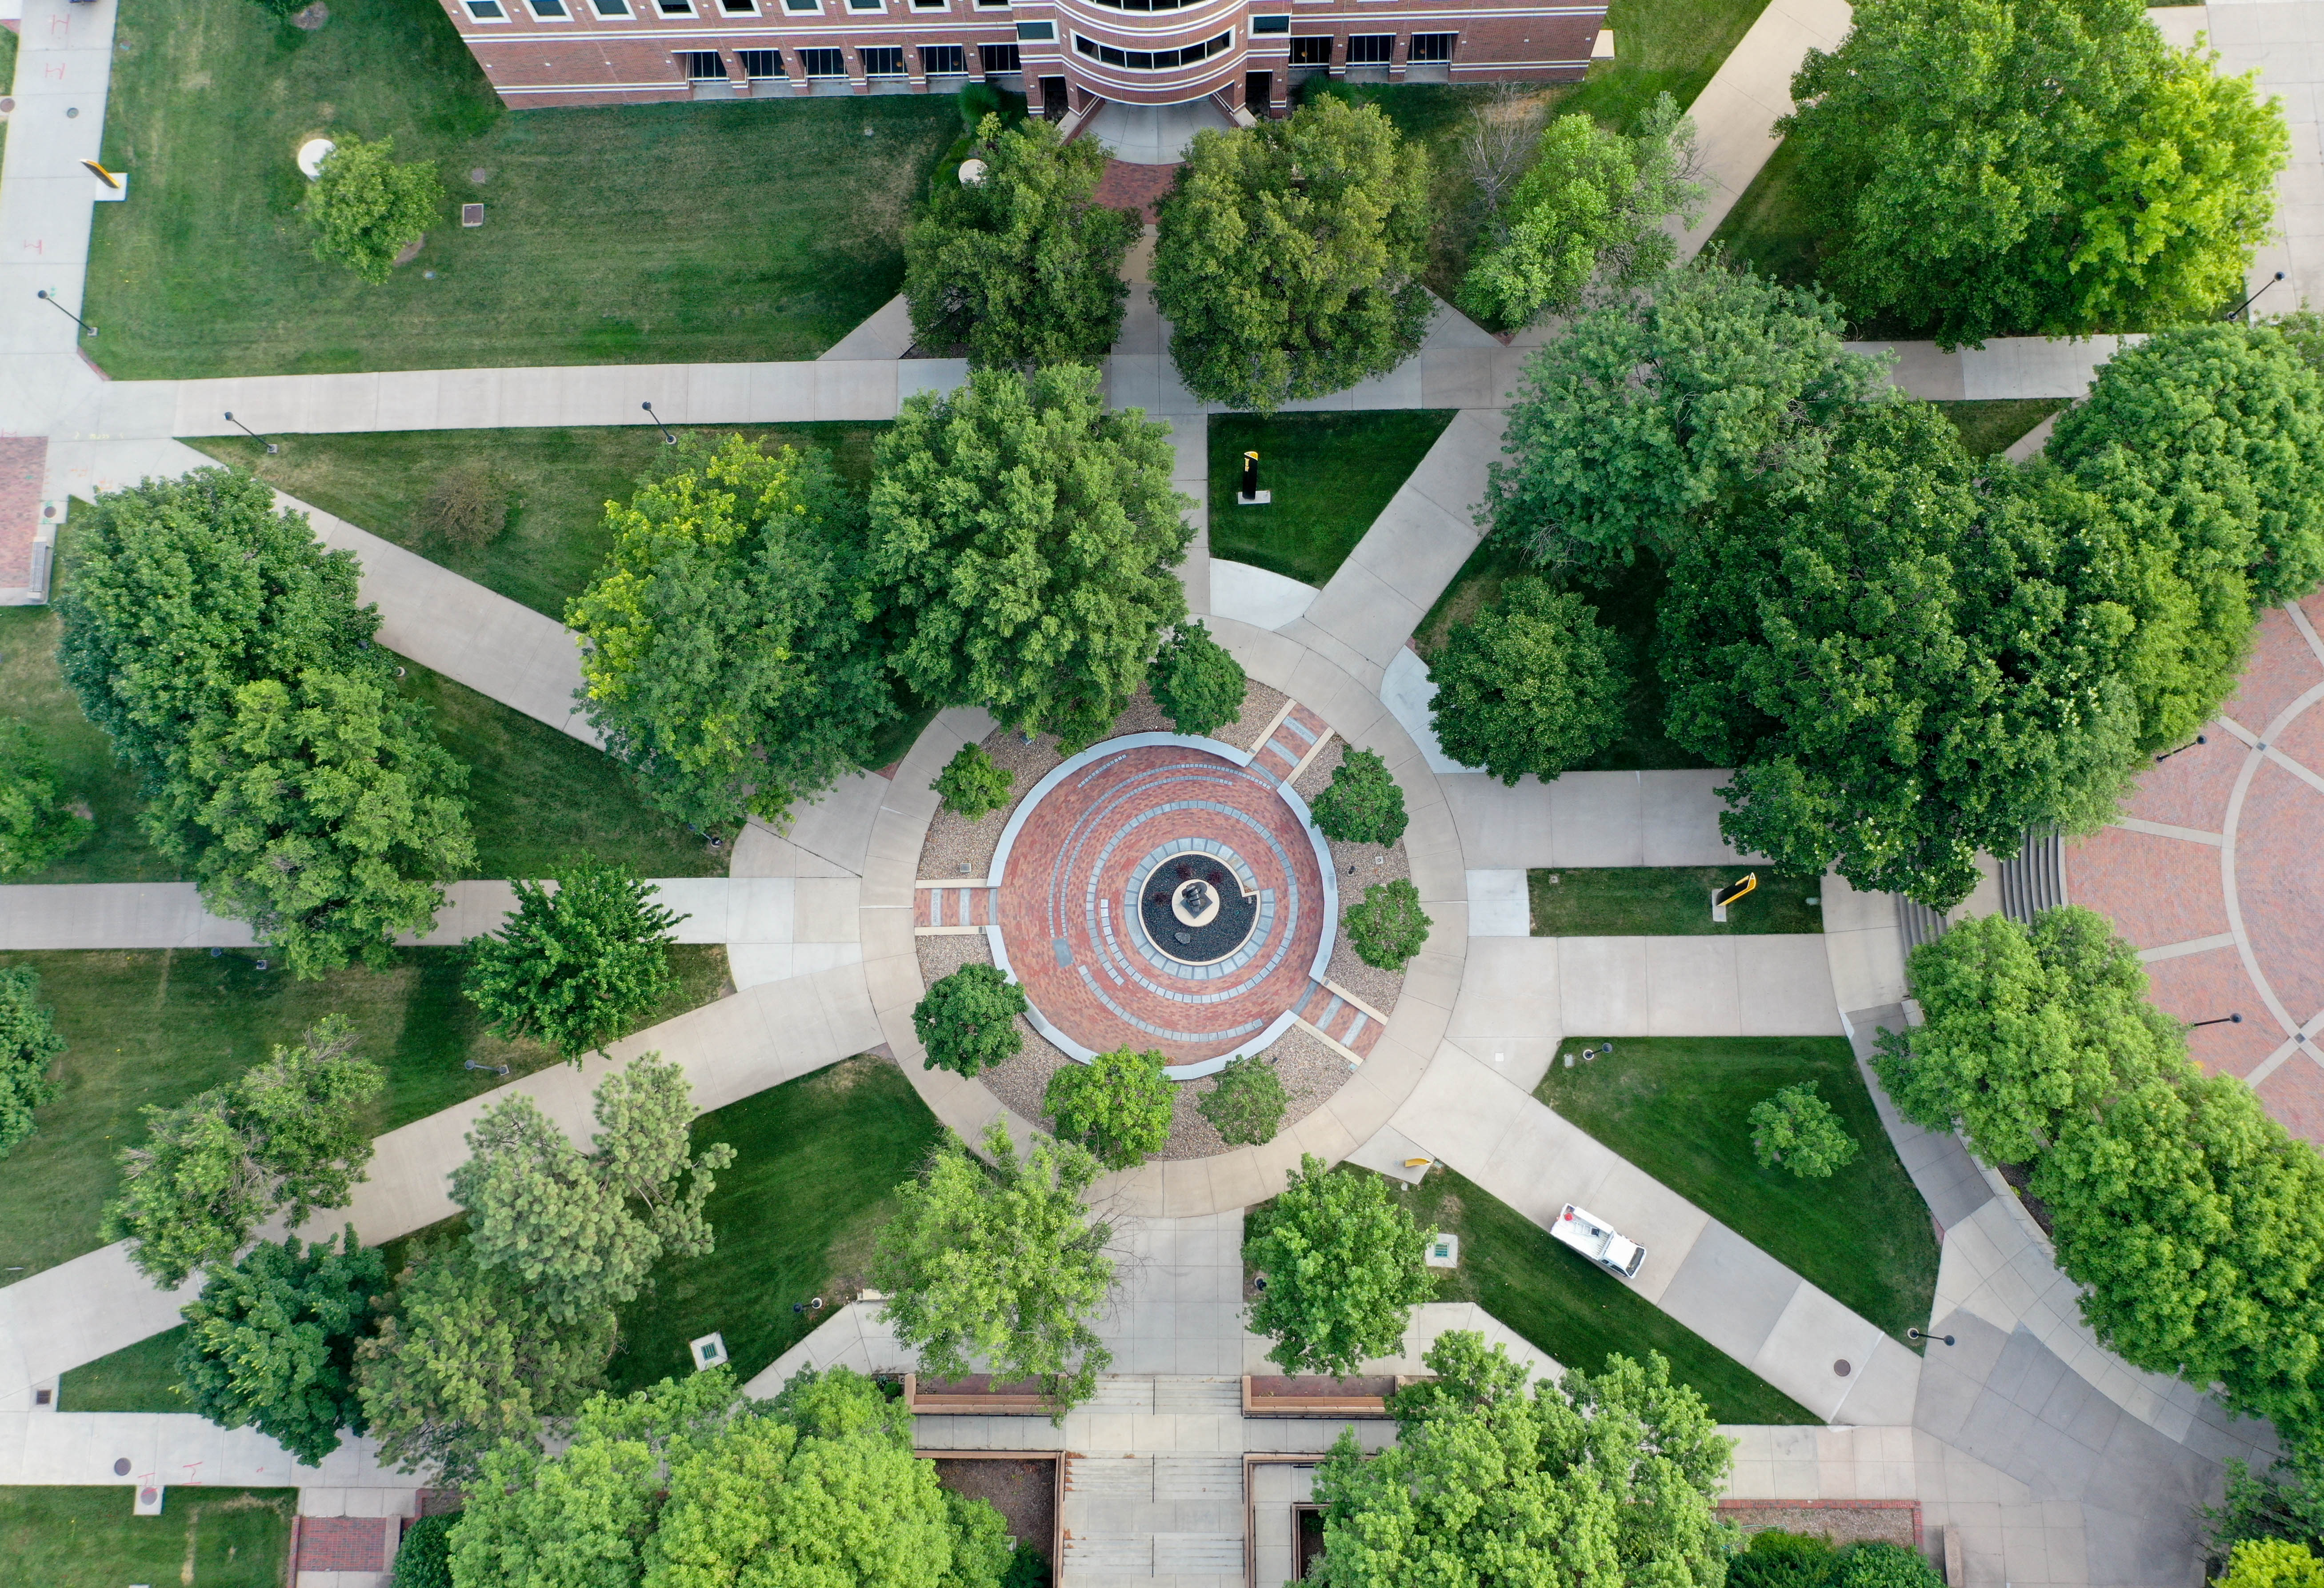 Background image of WSU pathways viewed from above